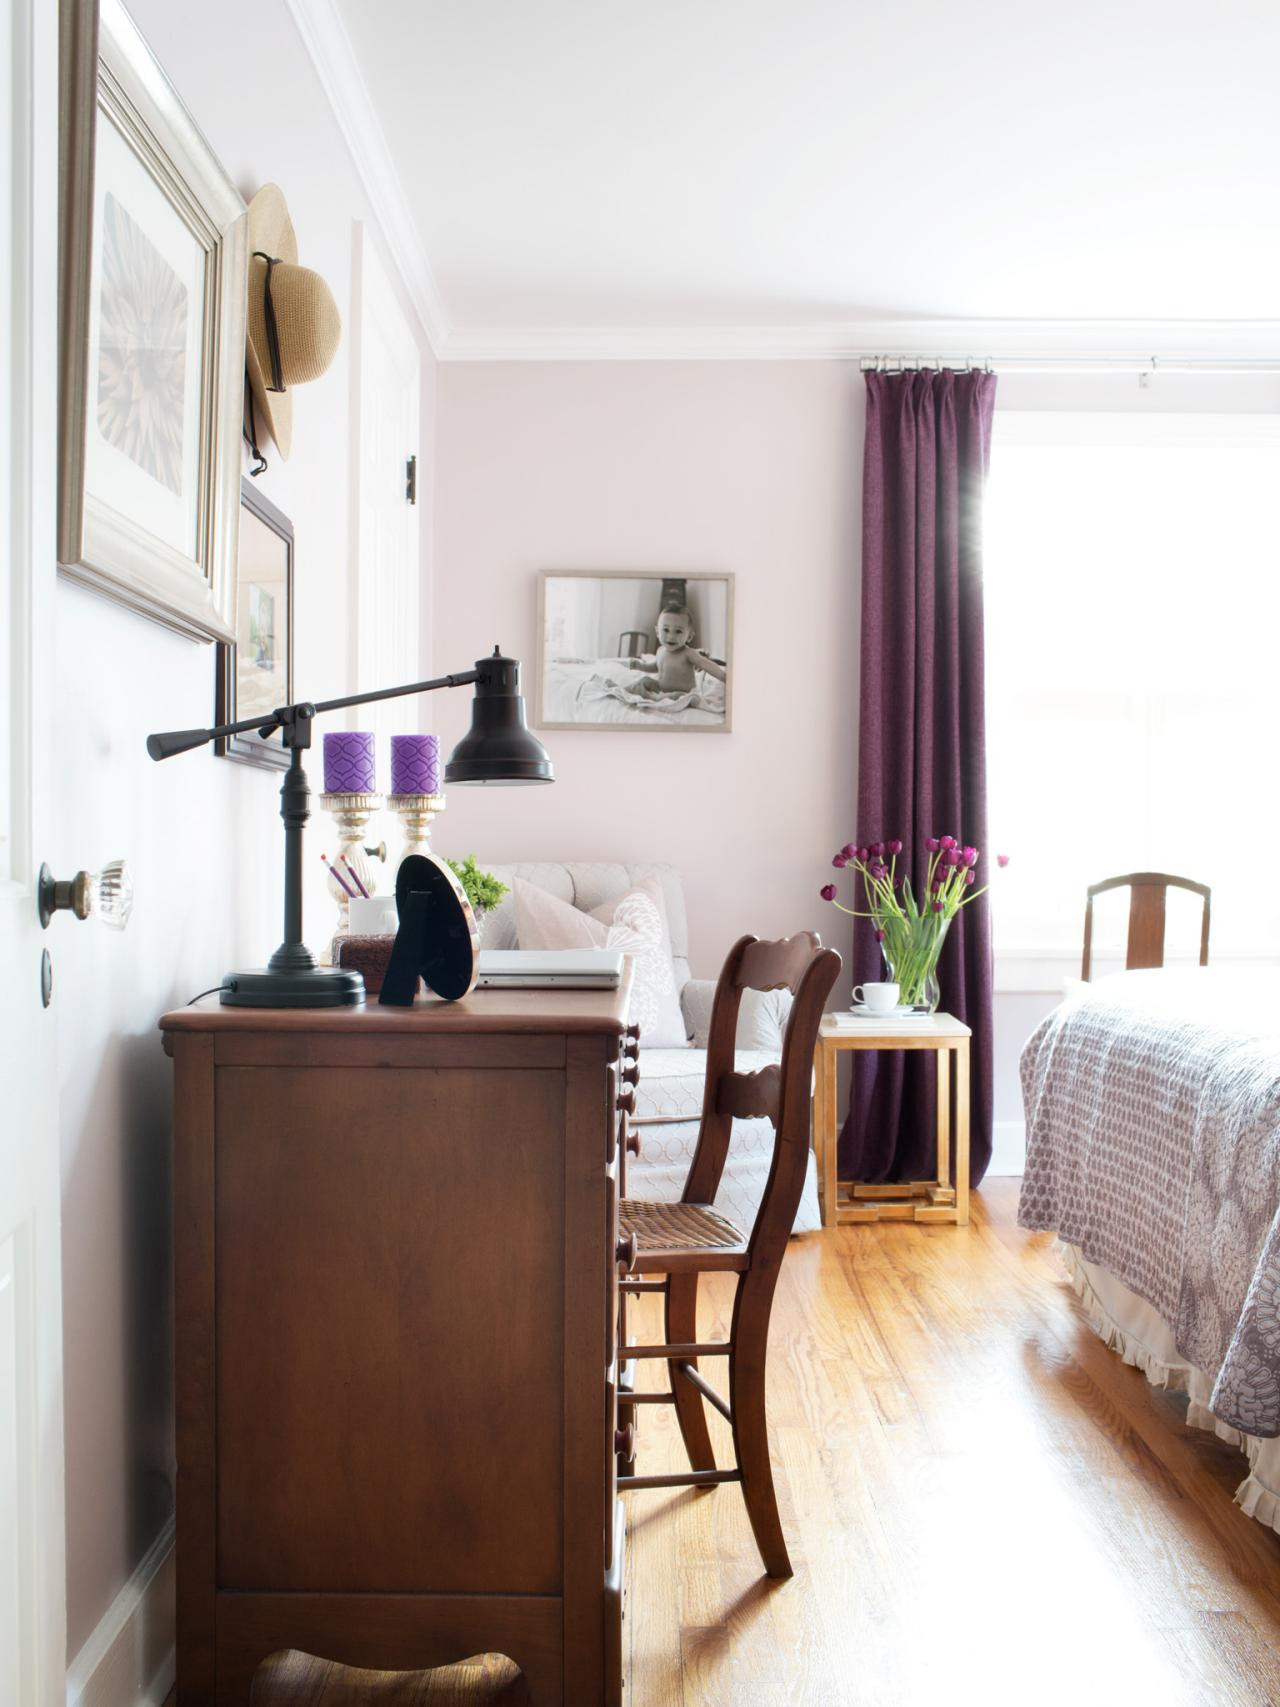 Lavender Bedroom Walls
 10 Bedrooms to Inspire You to Go Lavender